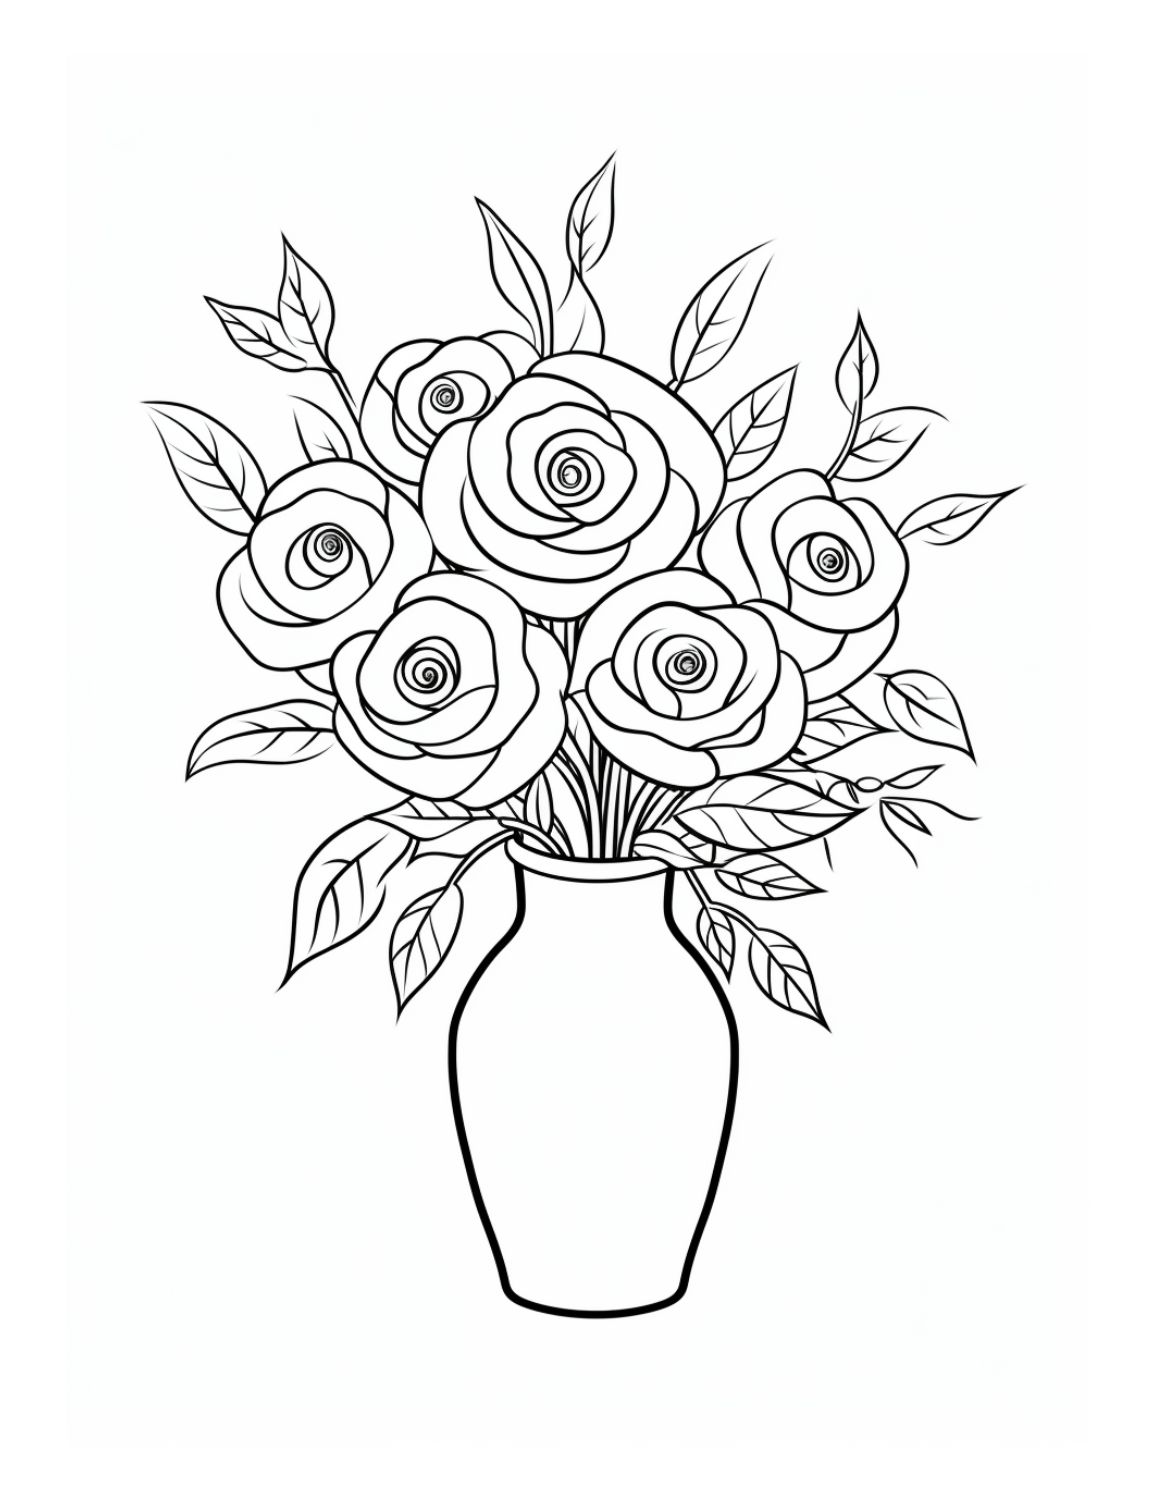 Free rose coloring pages for kids and adults to enjoy skip to my lou